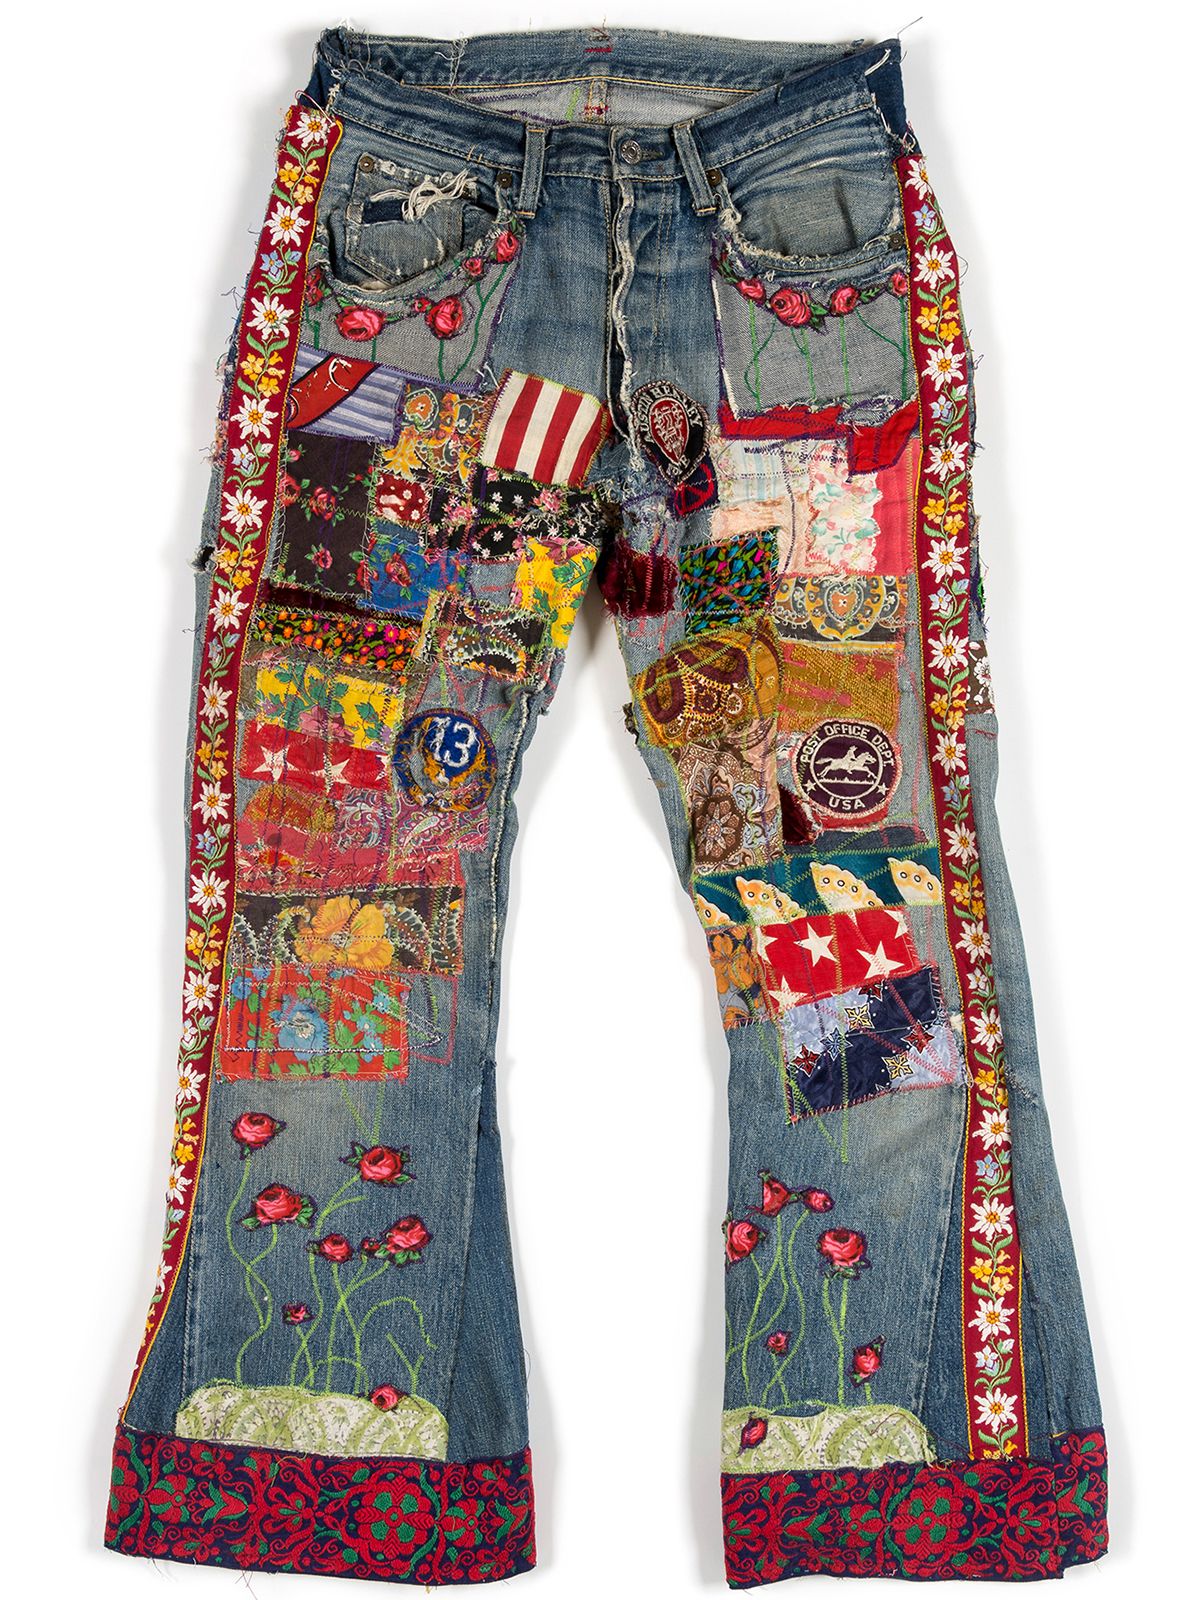 Levi’s 501: a history of self-expression | John Lewis